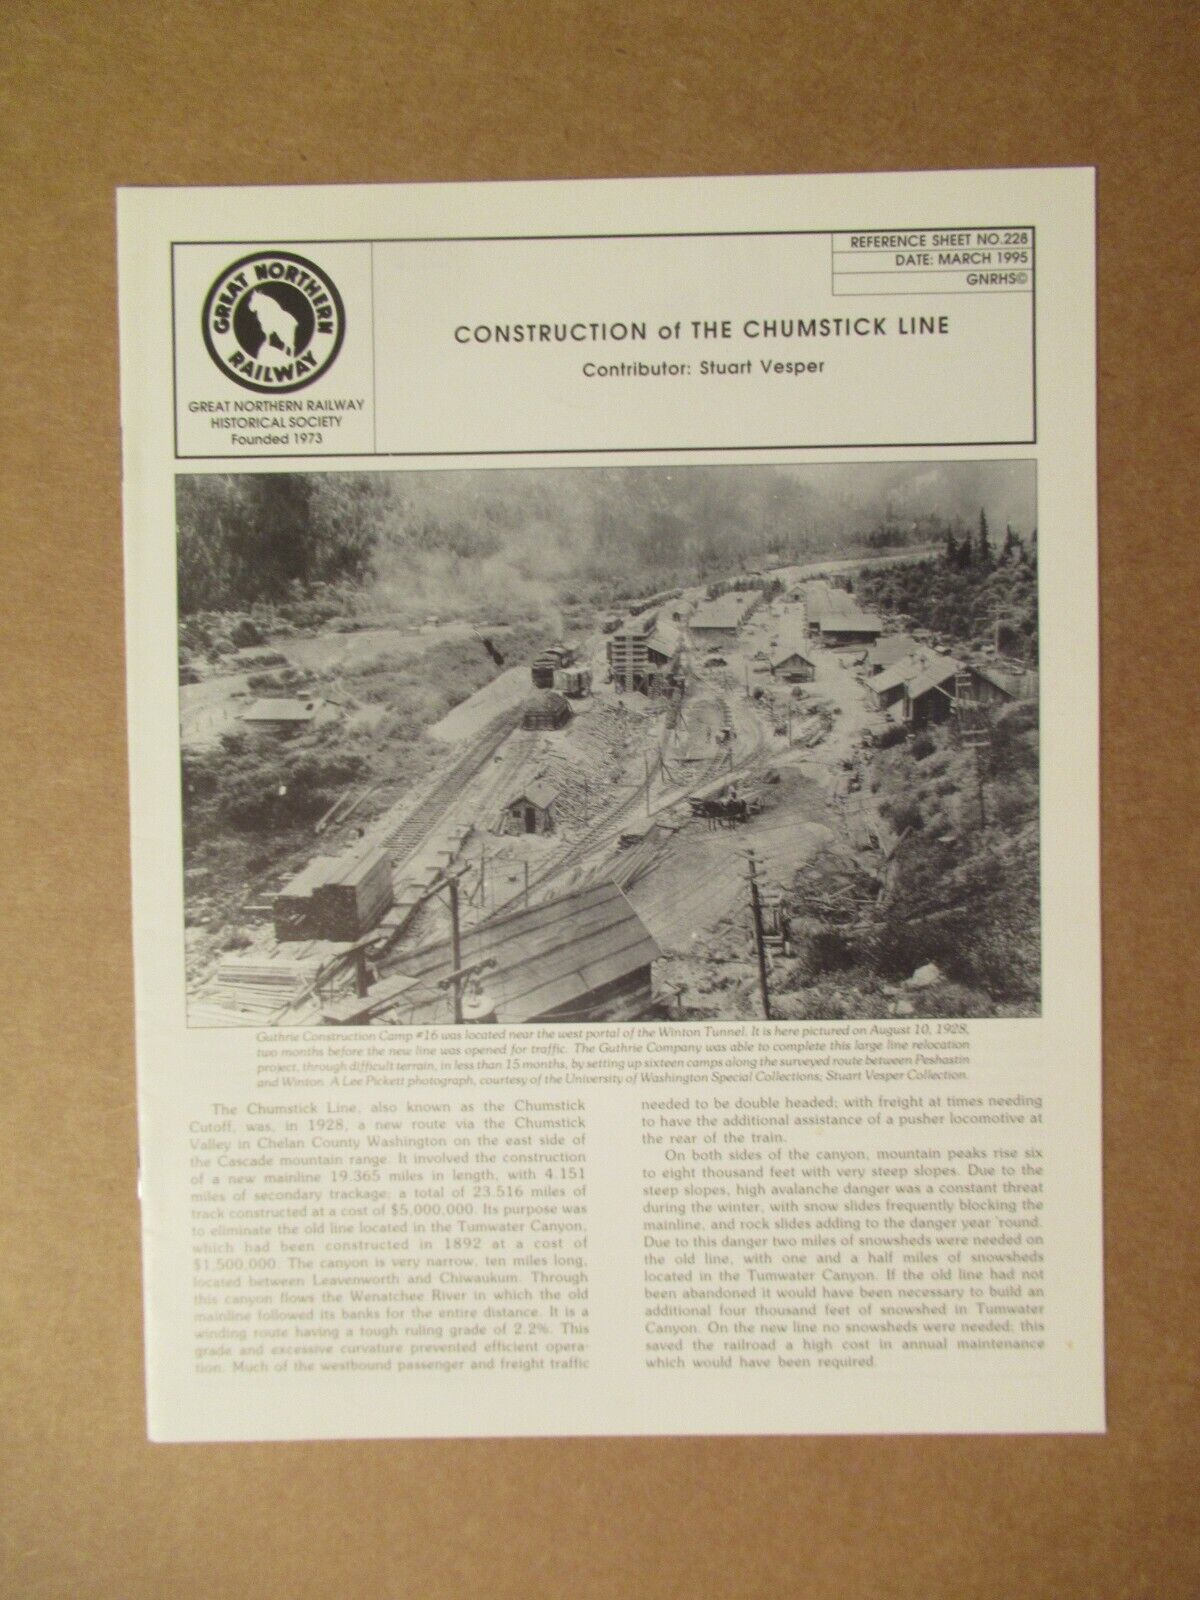 Great Northern Reference Sheet 228 Construction Of Chumstick Line